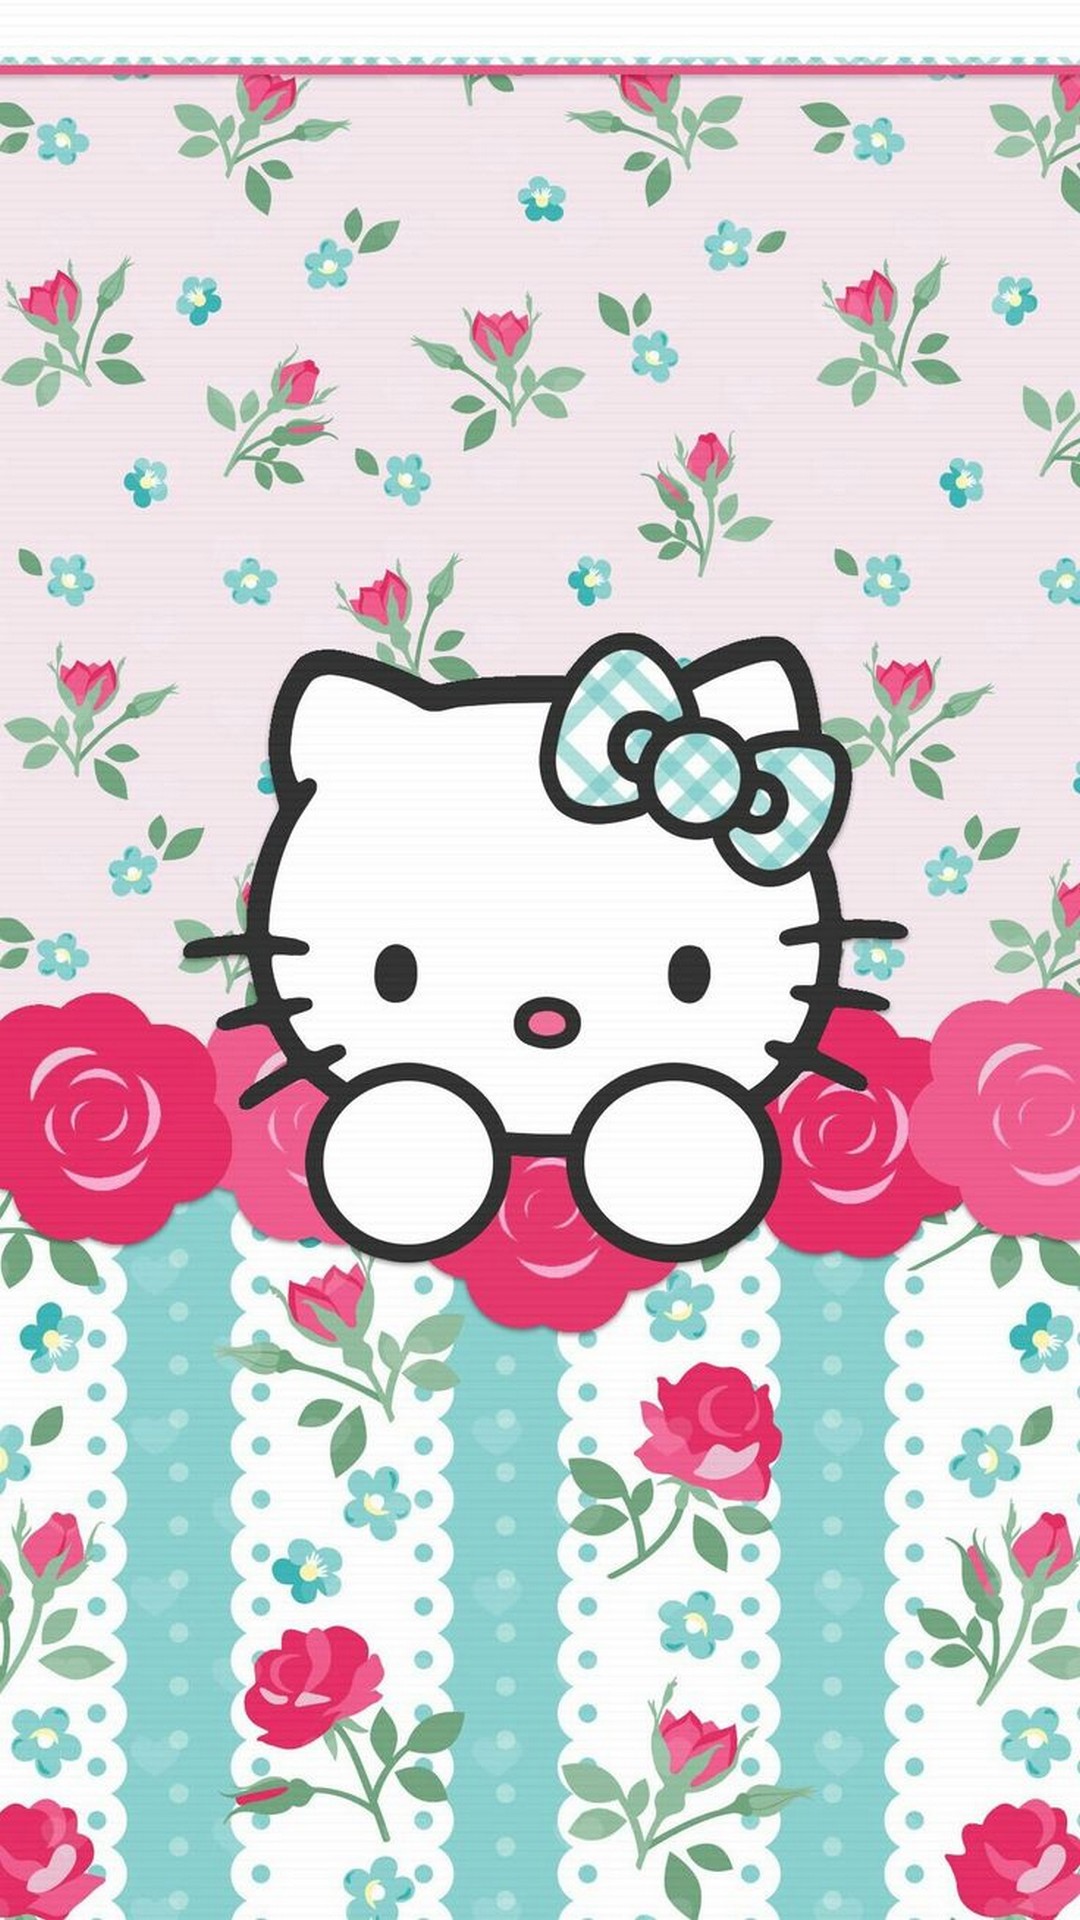 Hello Kitty Images iPhone Wallpaper with resolution 1080X1920 pixel. You can make this wallpaper for your iPhone 5, 6, 7, 8, X backgrounds, Mobile Screensaver, or iPad Lock Screen